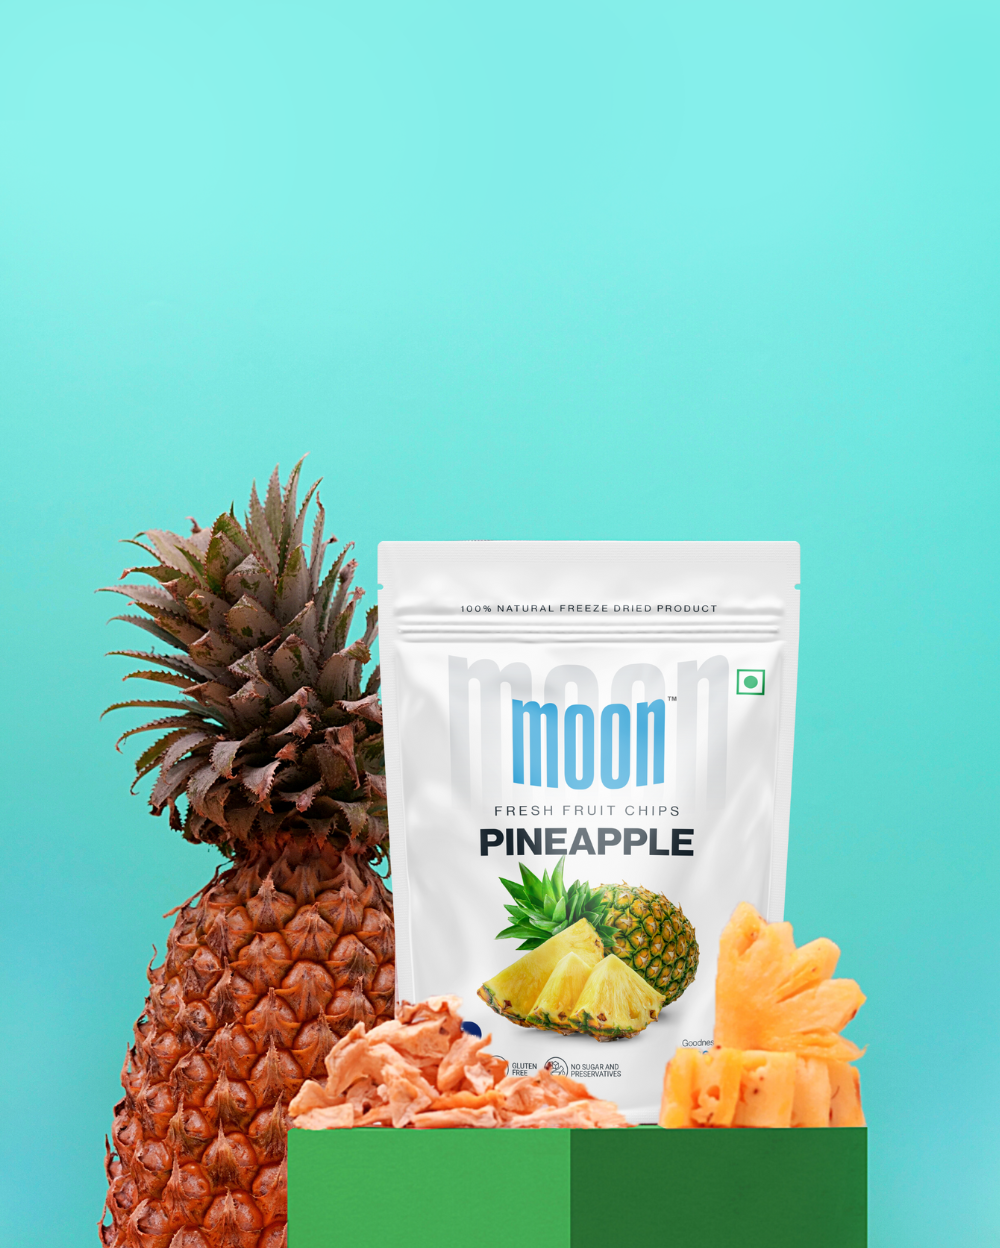 A box with Moon Freeze Dried Pineapple from Themoonstoreindia, bananas, and a bag of chips.